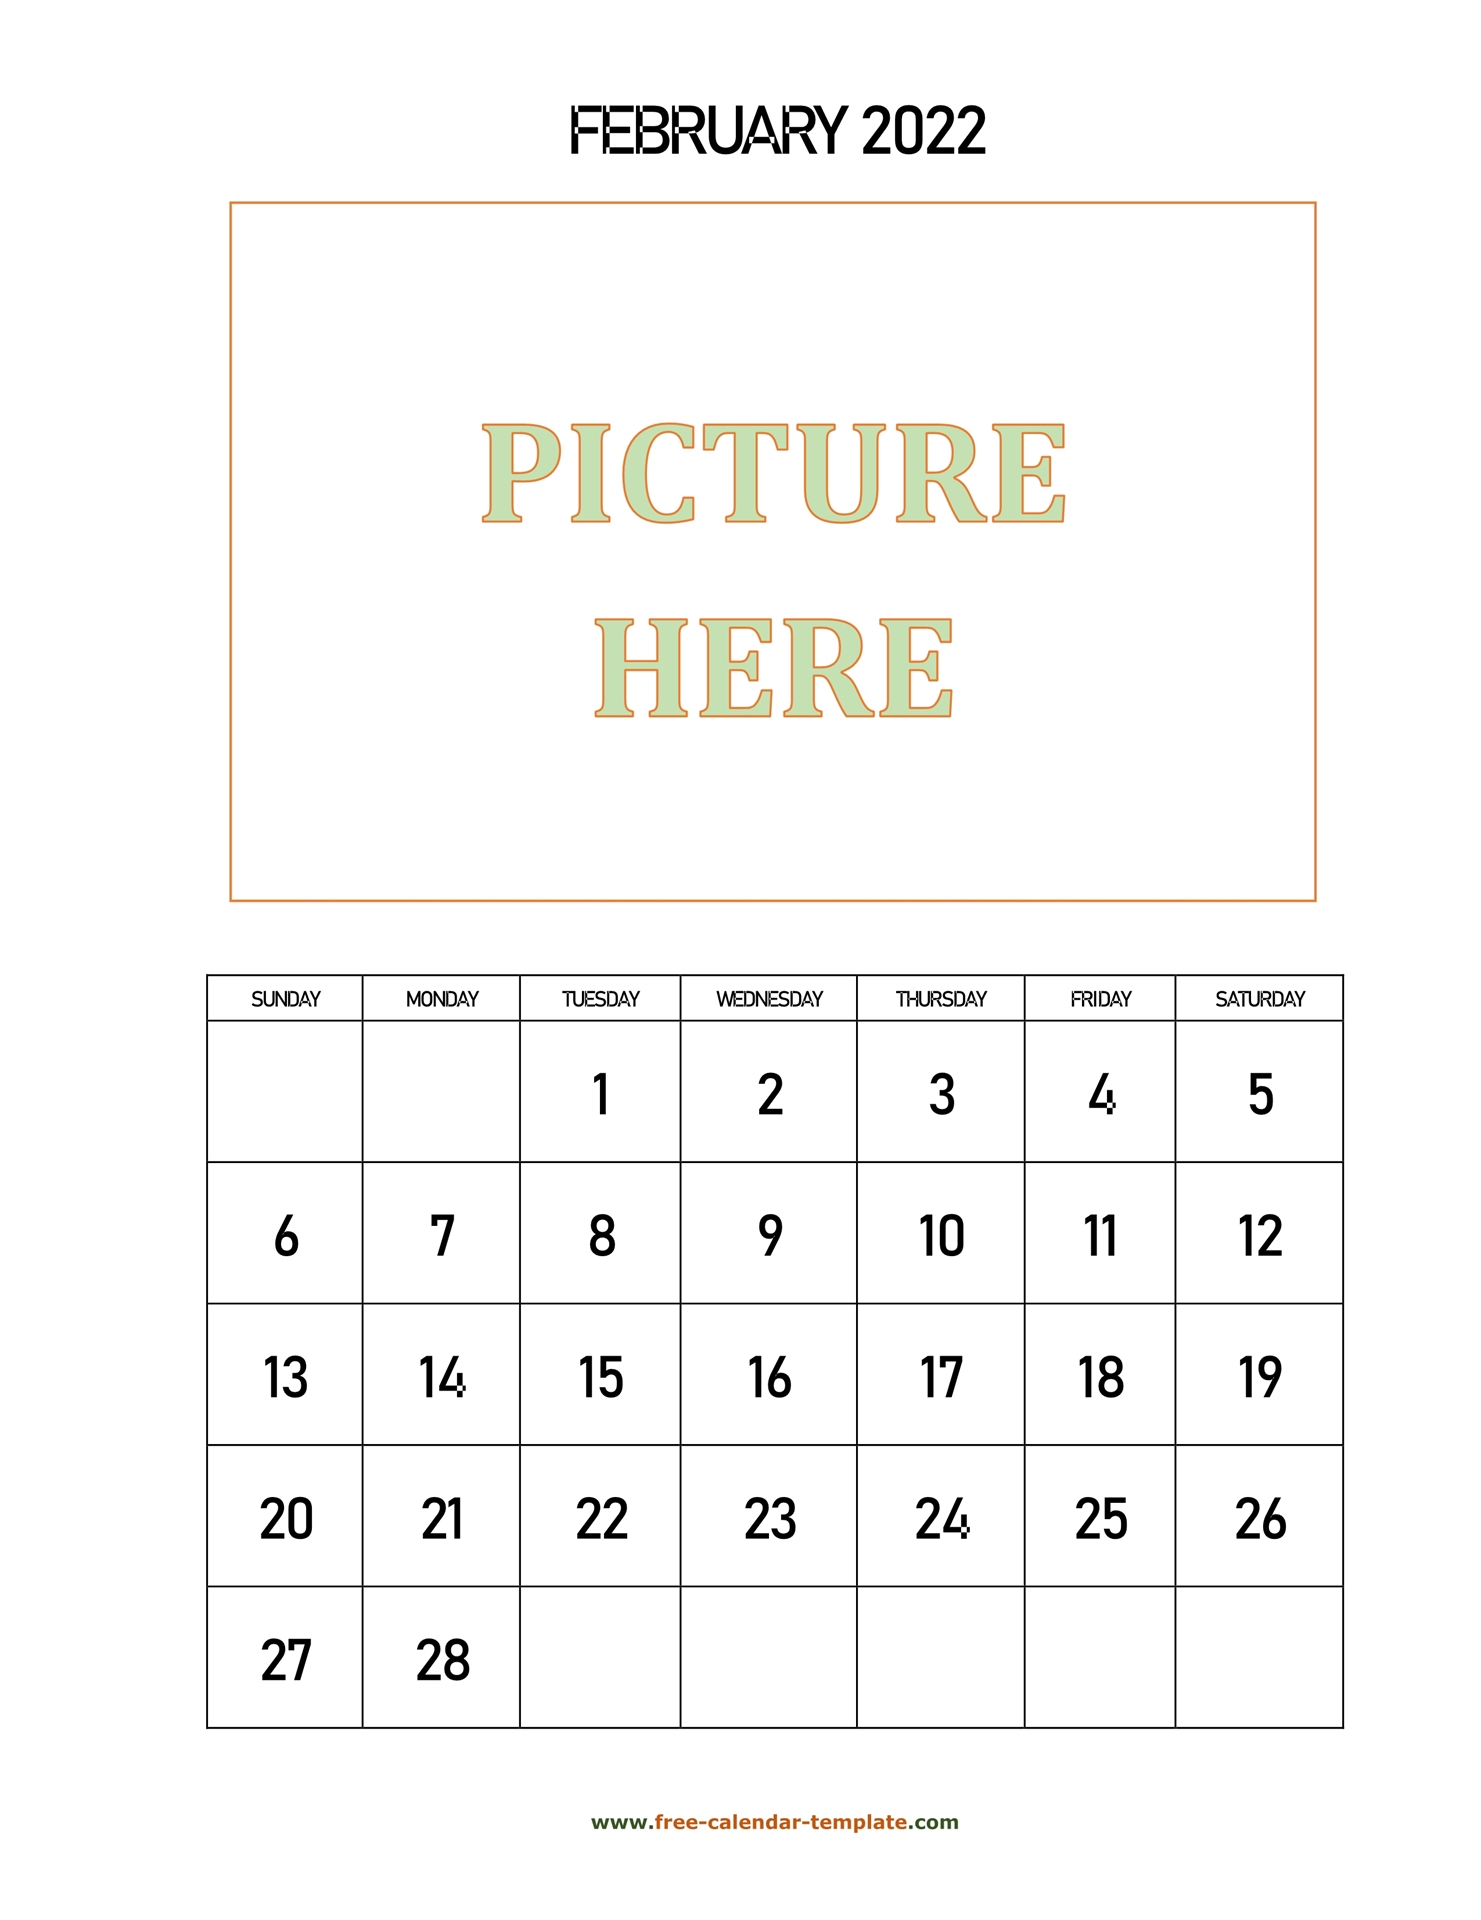 February Printable 2022 Calendar, Space For Add Picture